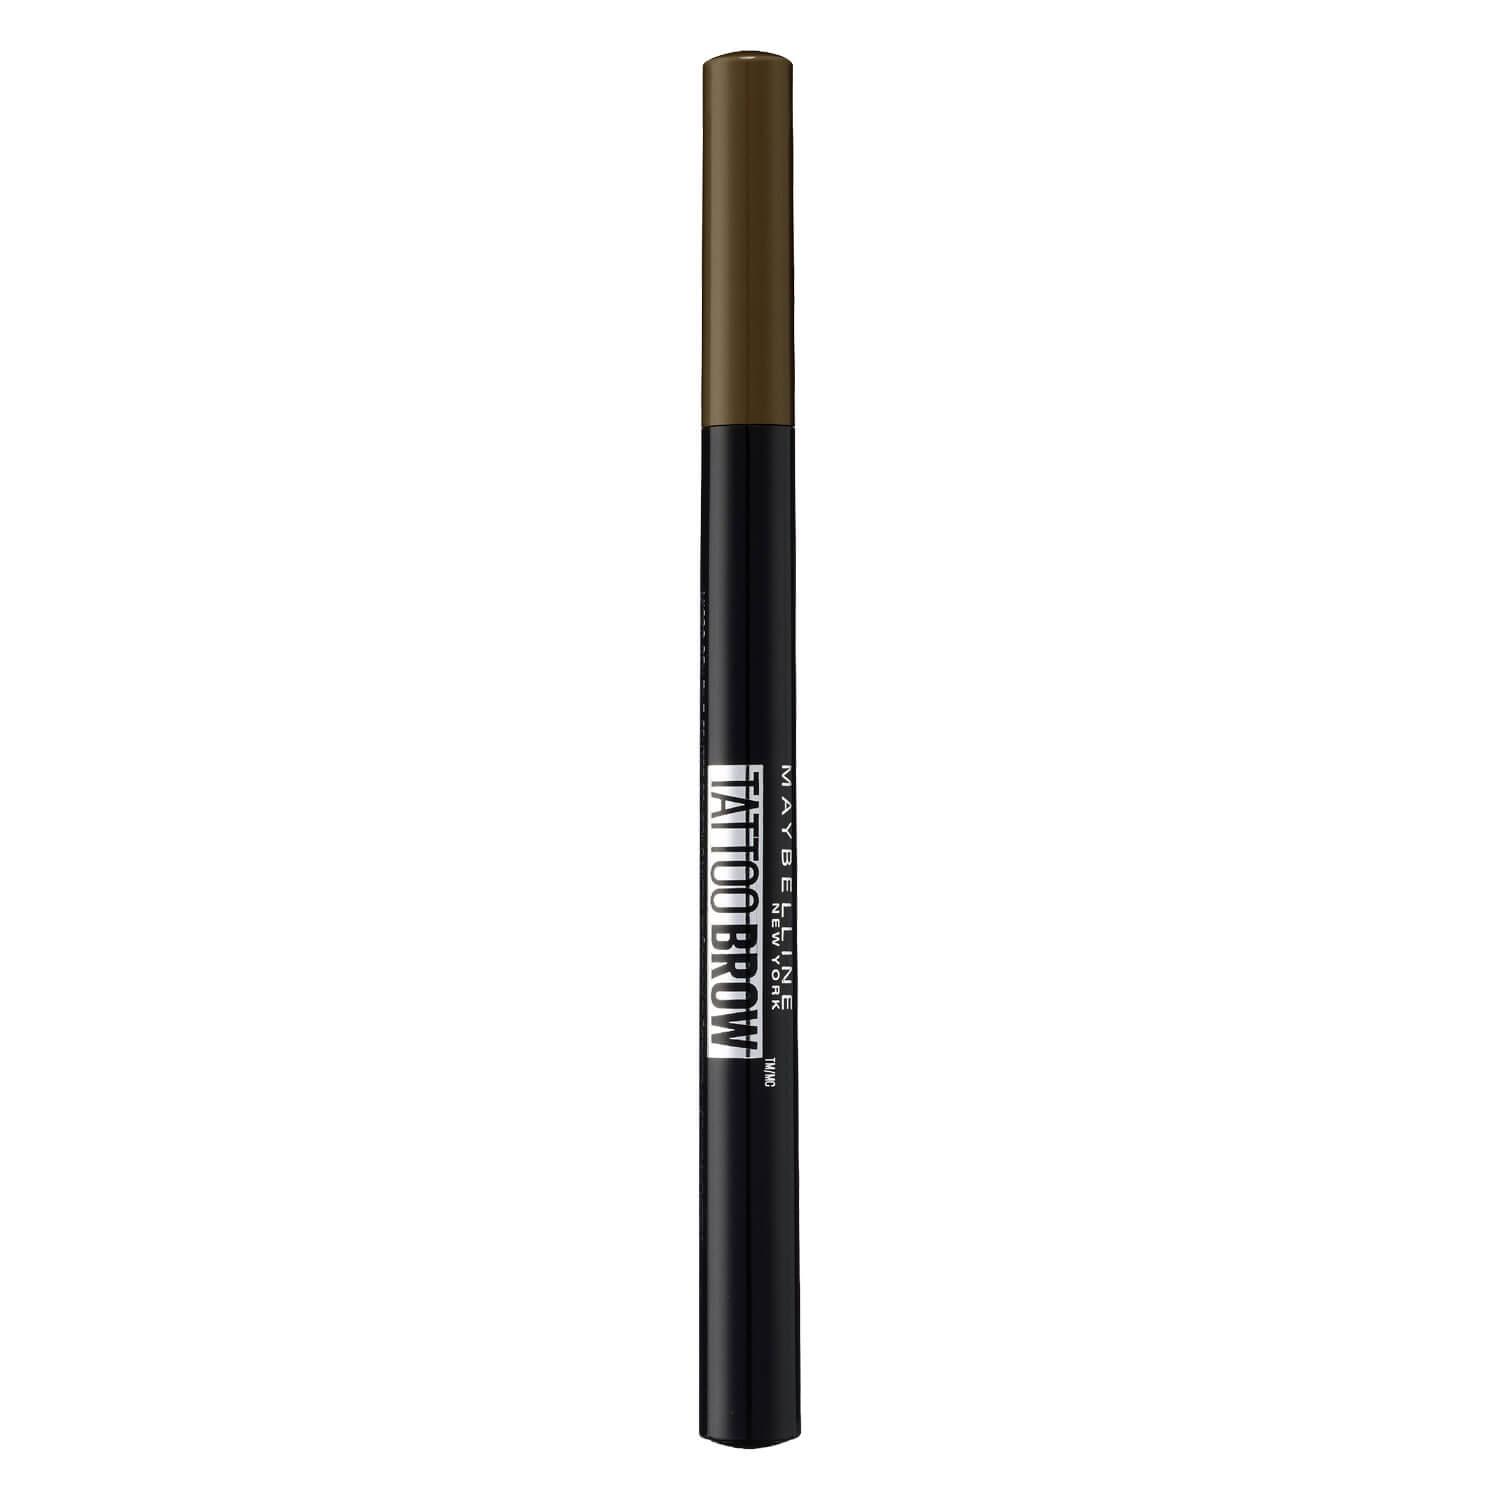 Maybelline NY Brows - Tattoo Brow Augenbrauenstift Nr. 130 Deep Brown